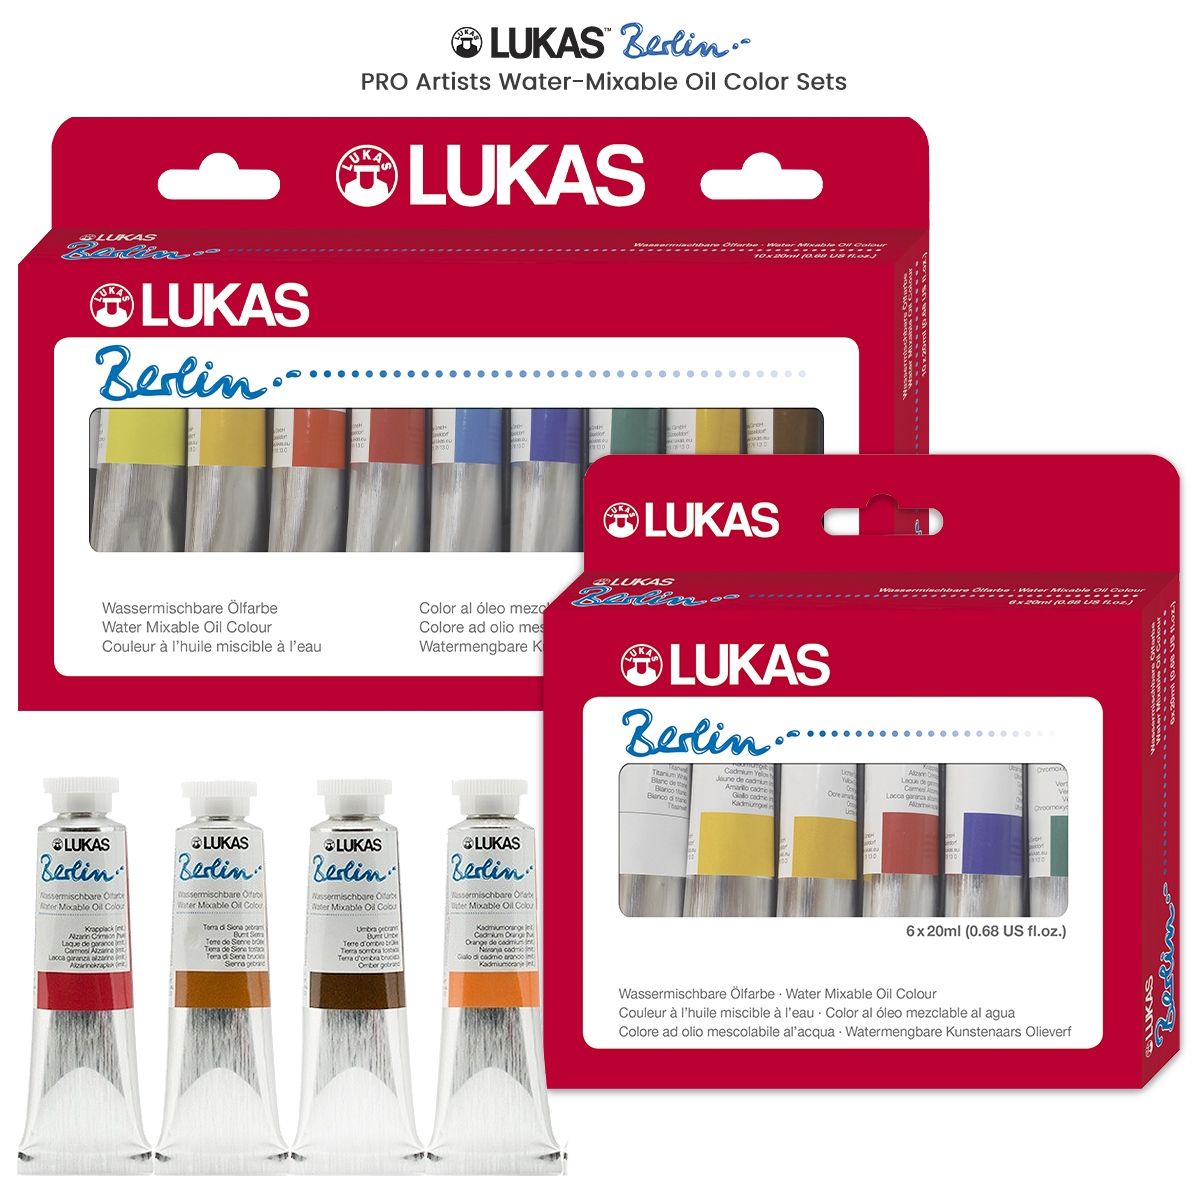 LUKAS Berlin PRO Water Mixable Oil Color Sets